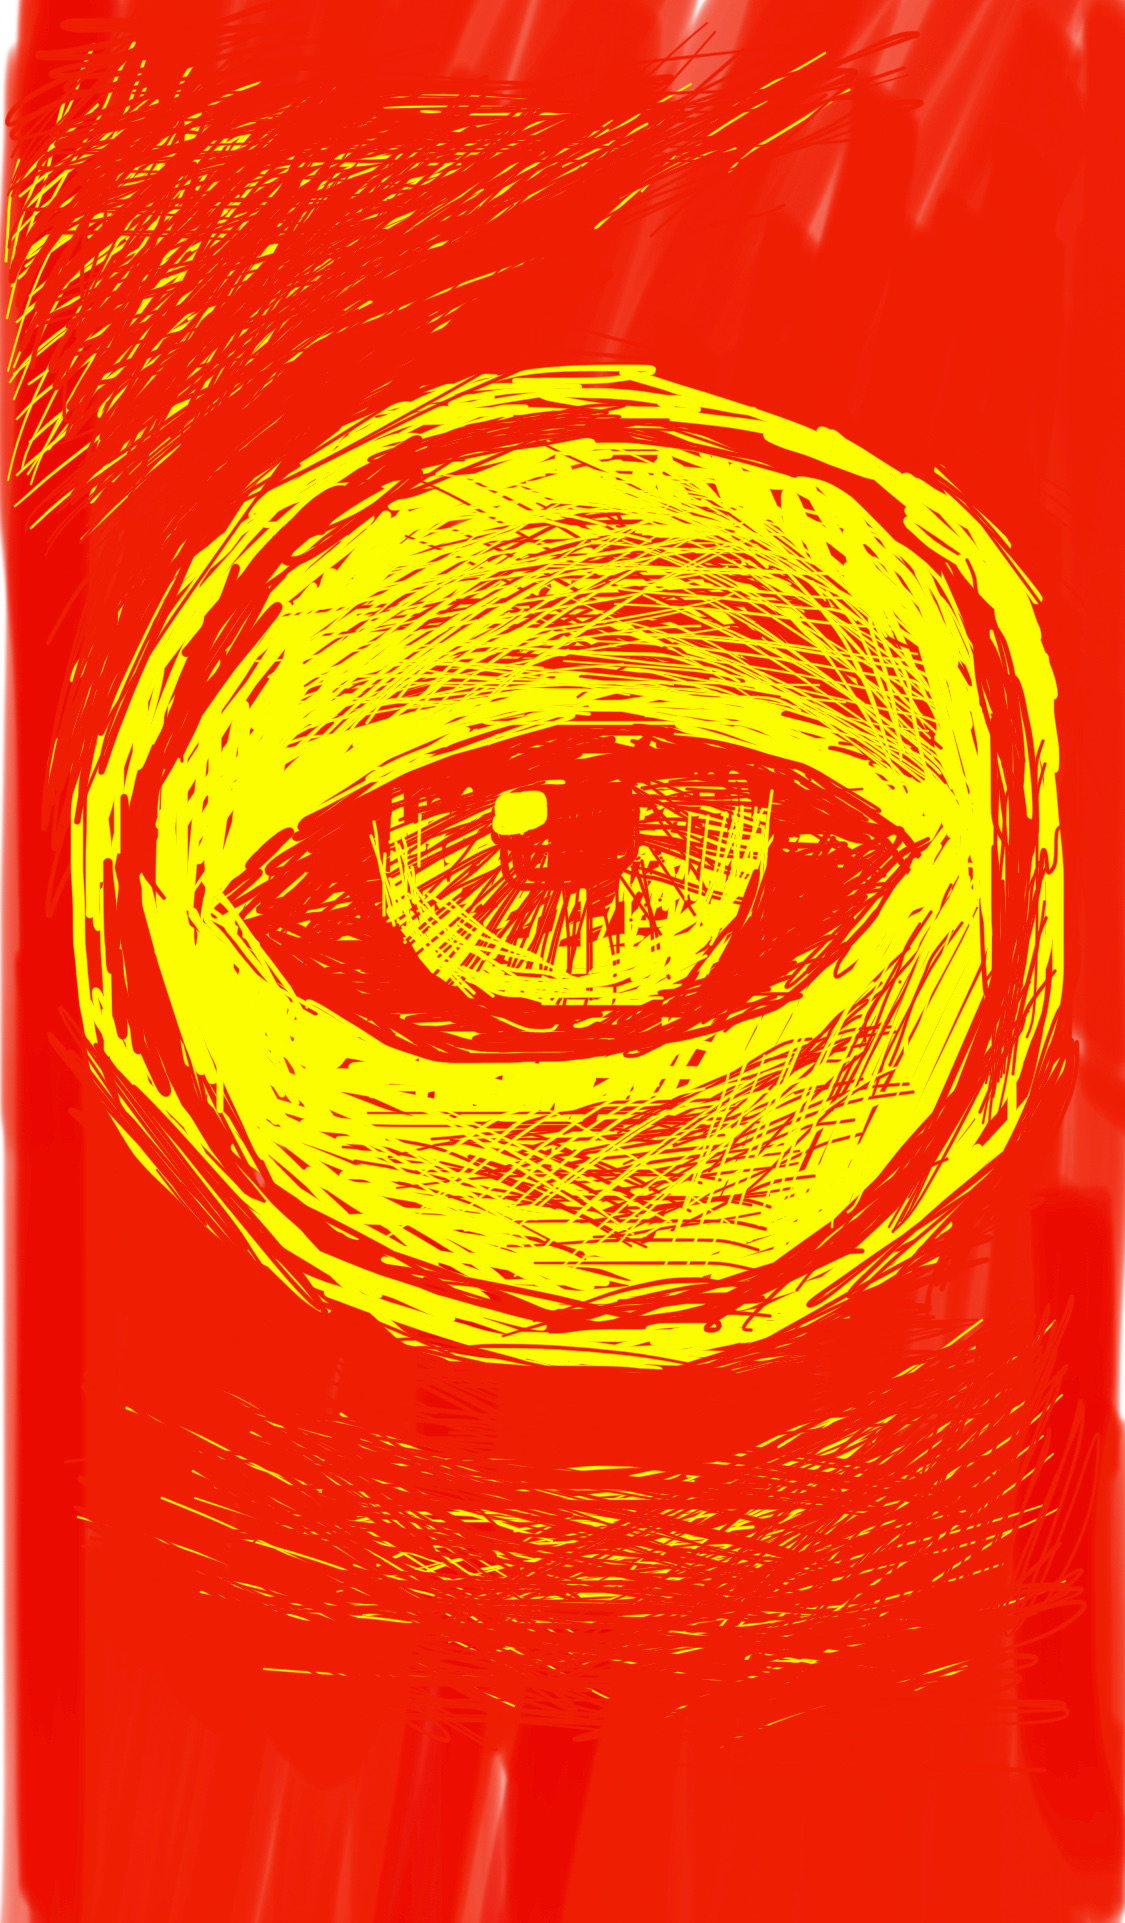 A yellow circle with a red eye inside it, on a red background